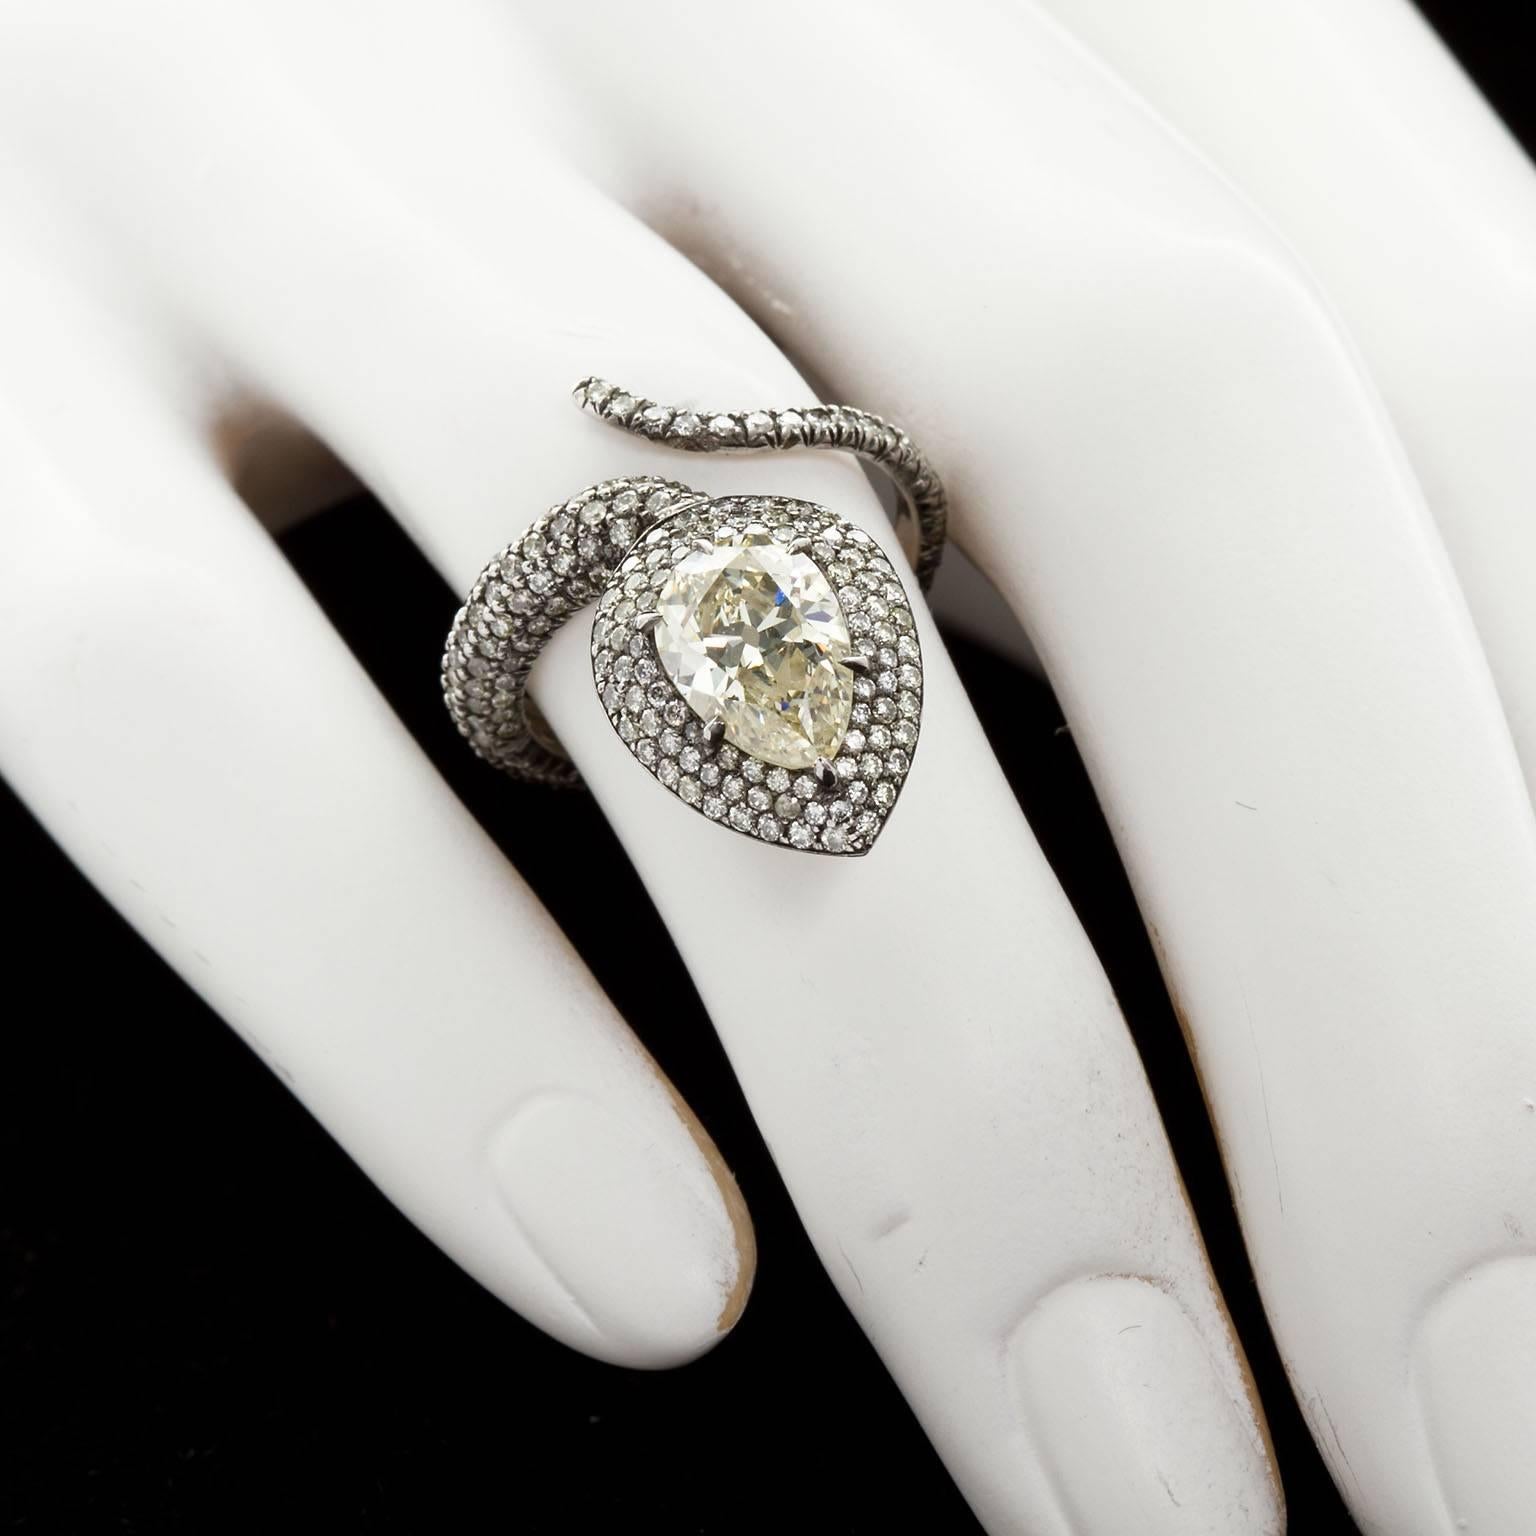 A fanciful diamond in black rhodium platinum snake ring . The center stone is an approx. 1.75 ct pear shape diamond set in a pave diamond set ring formed as the snake body with winding tail.  Approx. 1.25 ctw of diamond melee. Ring size 6.

No. 7843